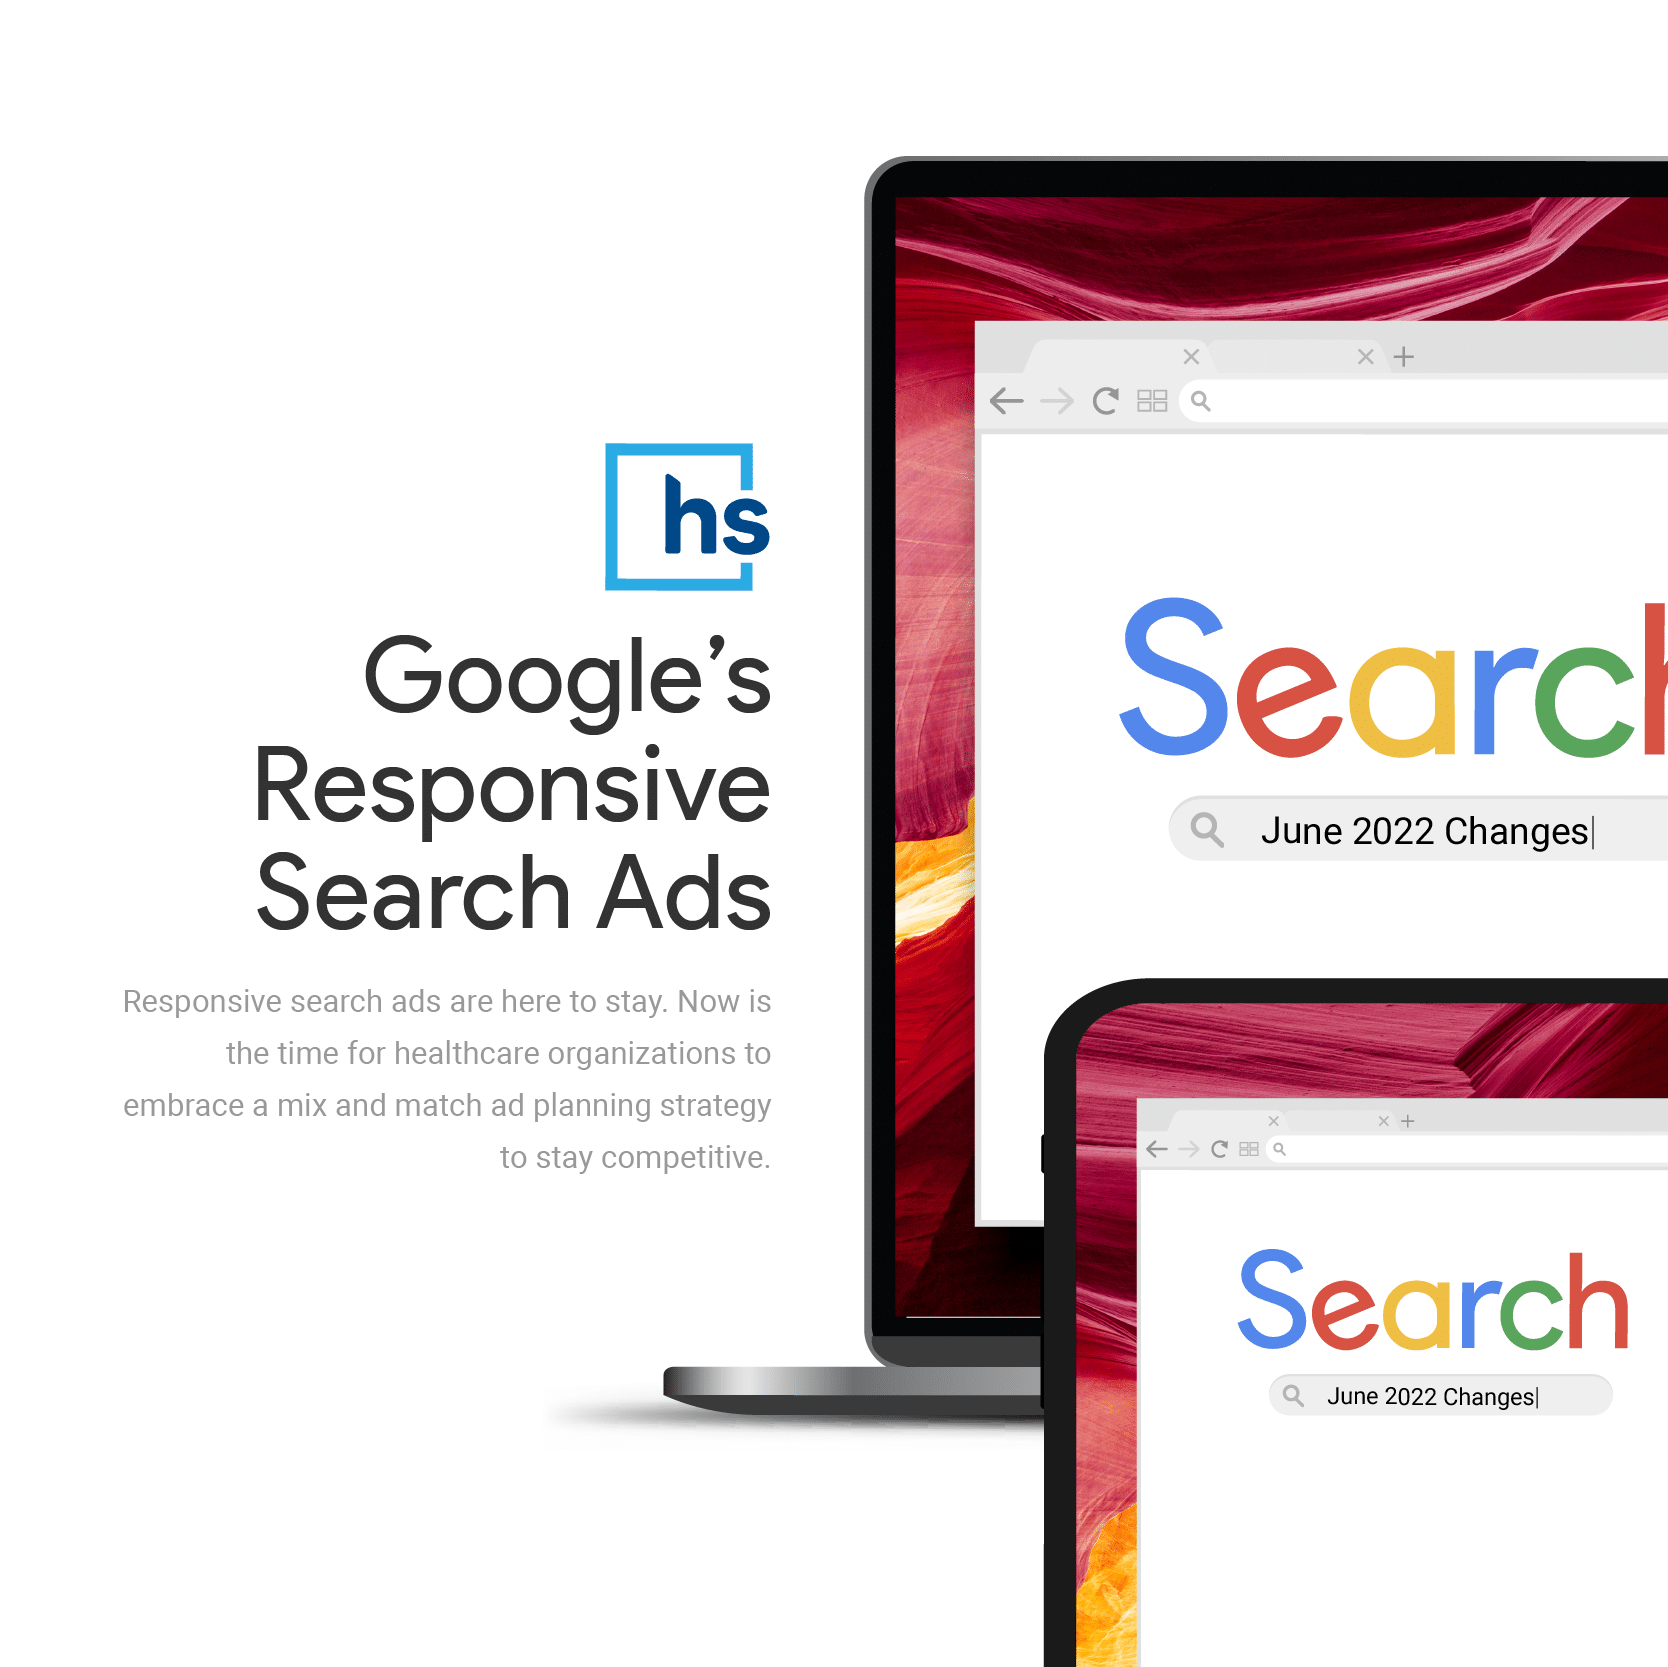 Google’s Responsive Search Ads | June 2022 Changes